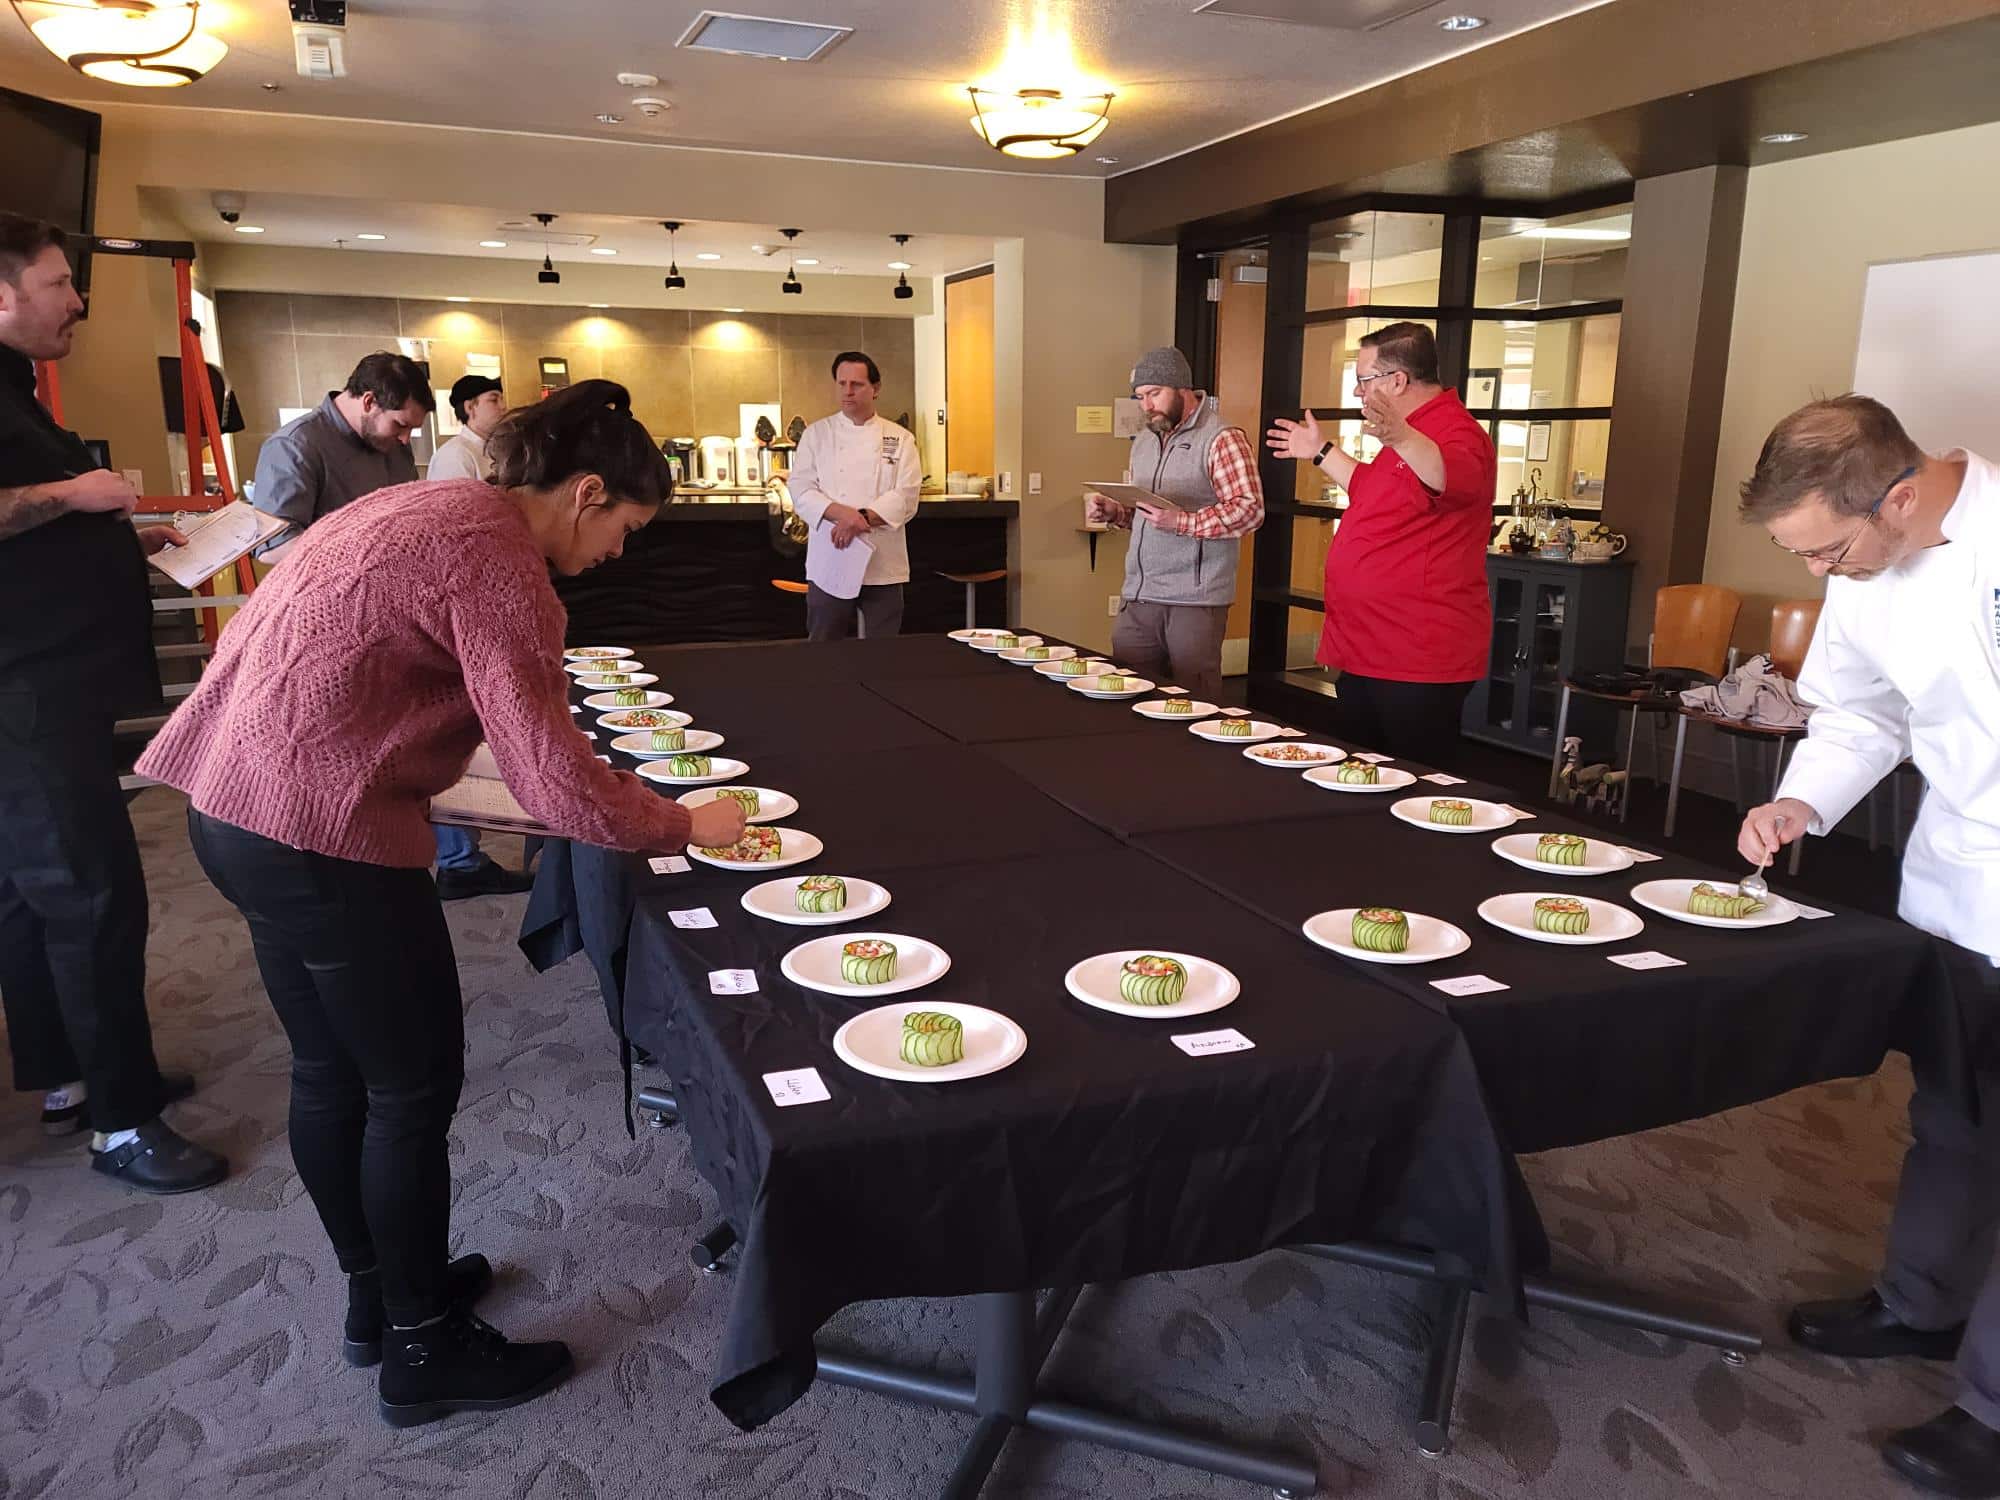 Judges around a black tables with all the salads to taste, critique and judge.